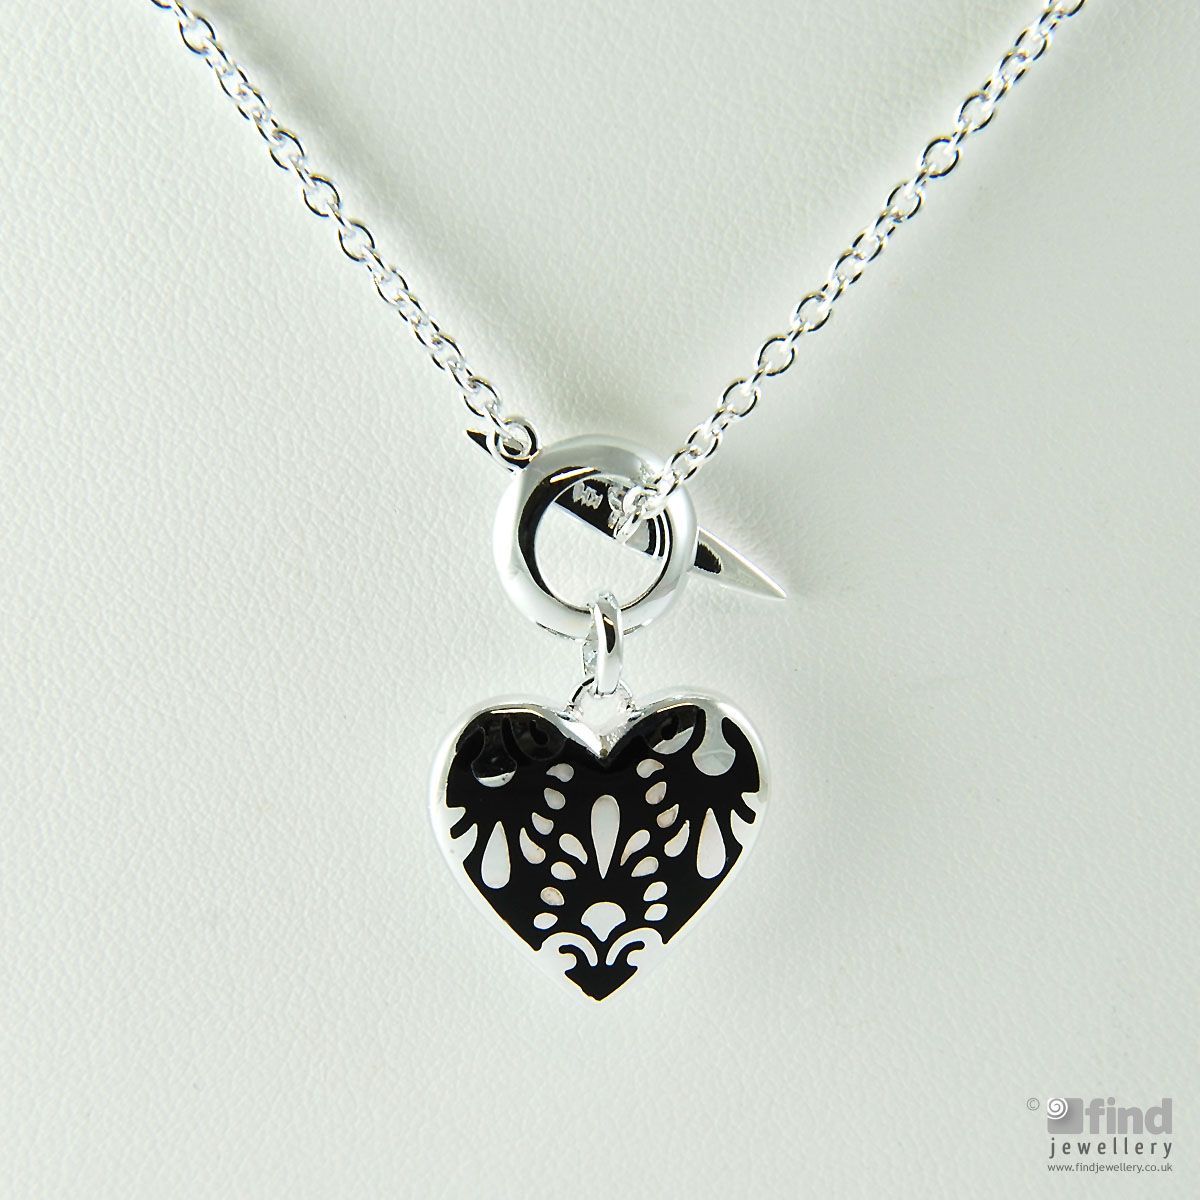 Dew Silver Sterling Silver Damask Heart Necklace